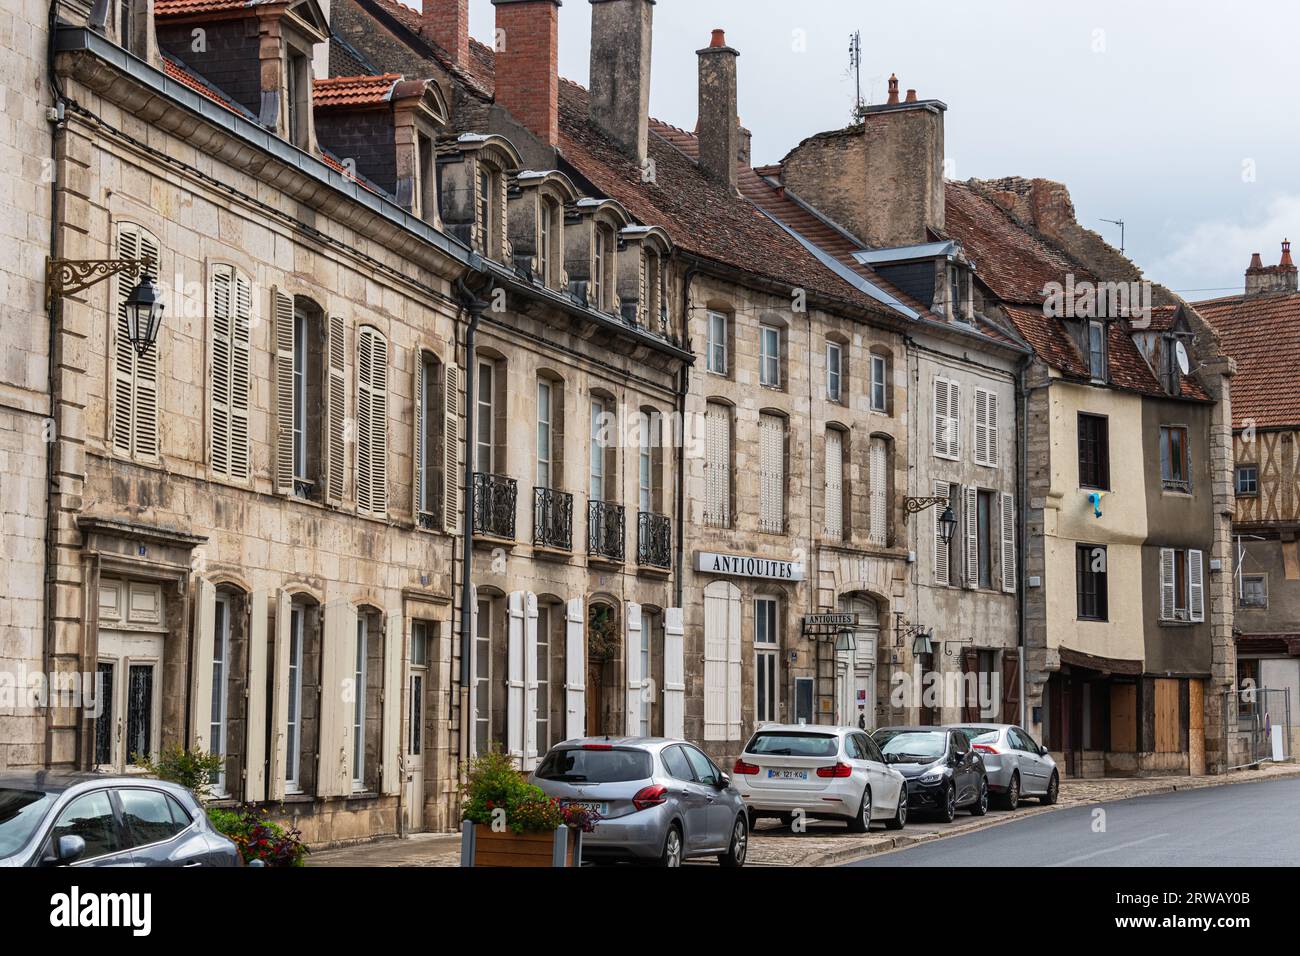 The Houses on Rue de Bourg in Chatillon sur Seine, Burgundy, France. Stock Photo